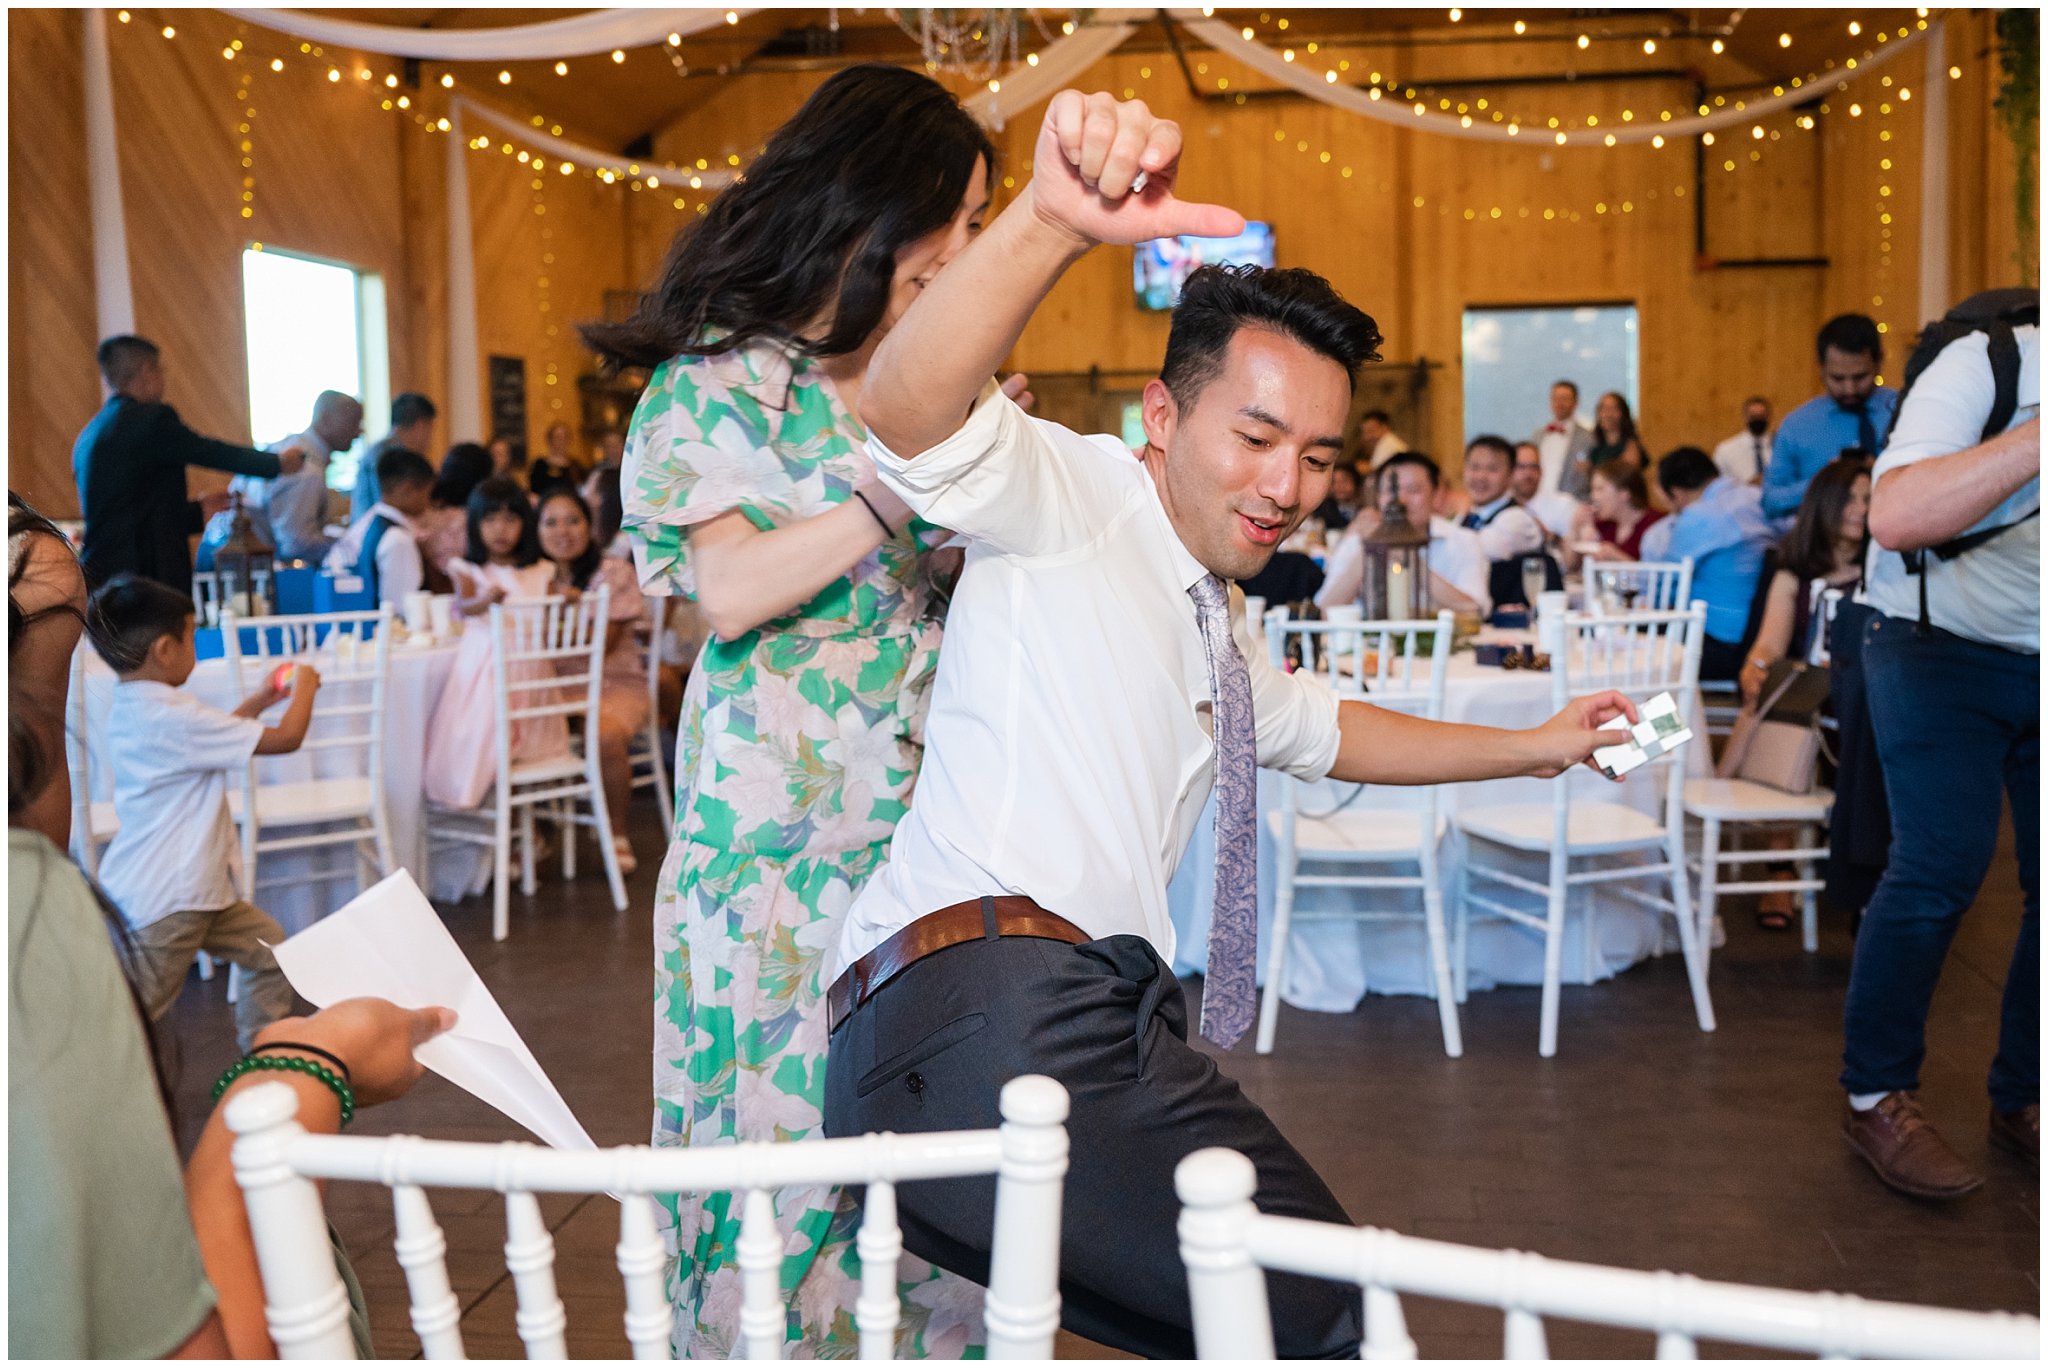 Wedding reception game ideas and scavenger hunt musical chairs | Oak Hills Utah Destination Wedding | Jessie and Dallin Photography